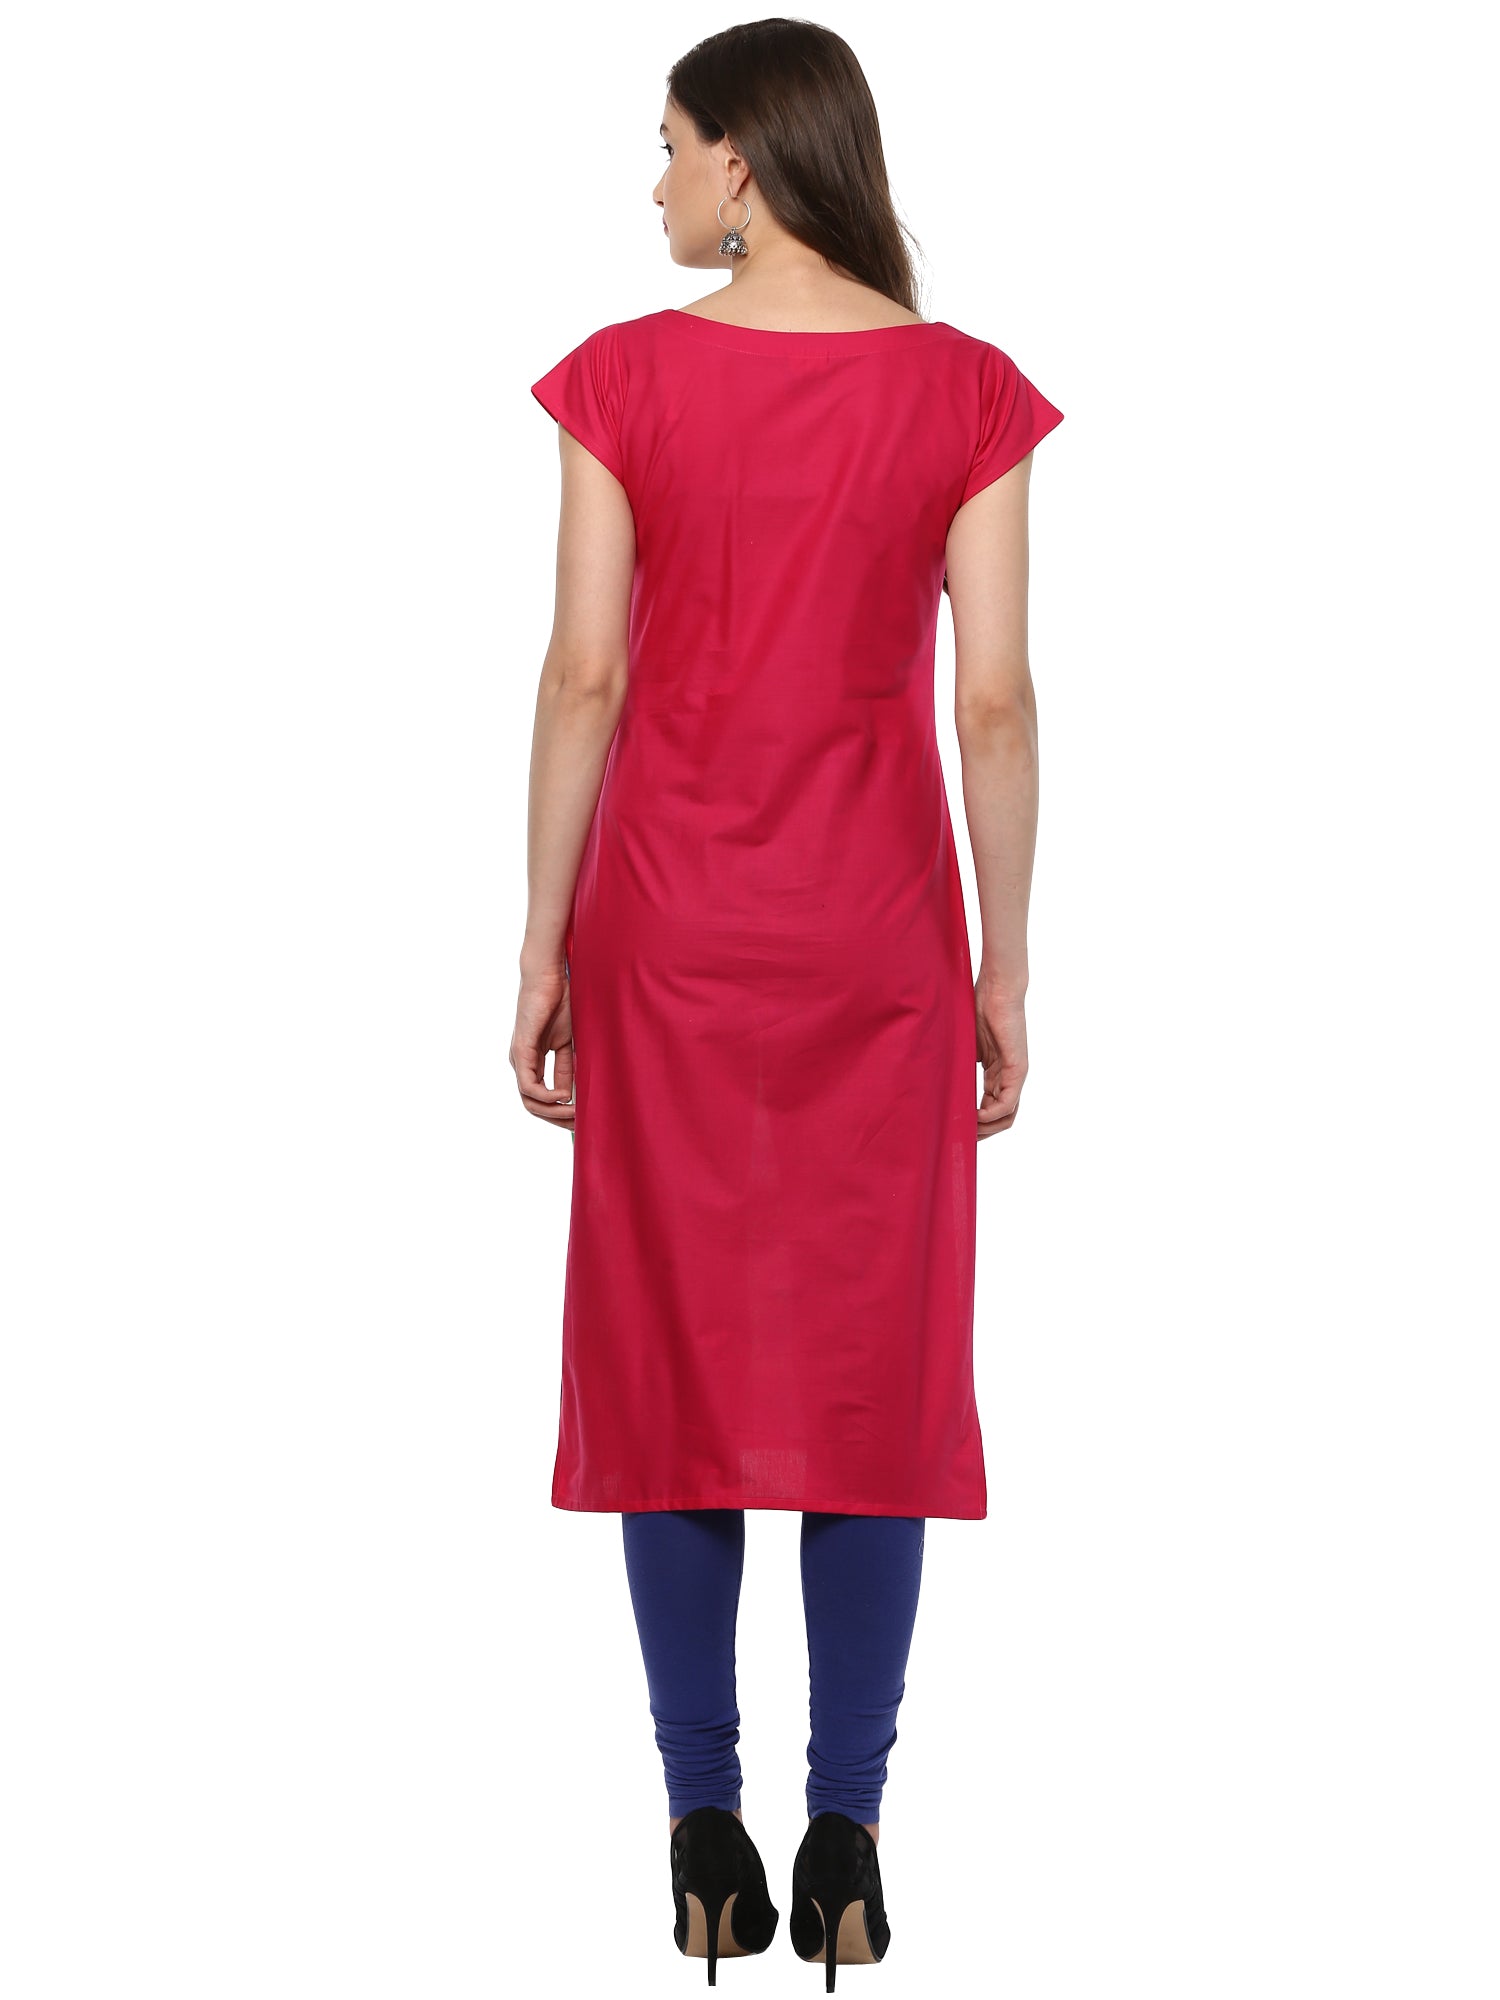 Women's Multi Colored Cap Sleeve And Boat Neck Cotton Only Kurti - Ahalyaa